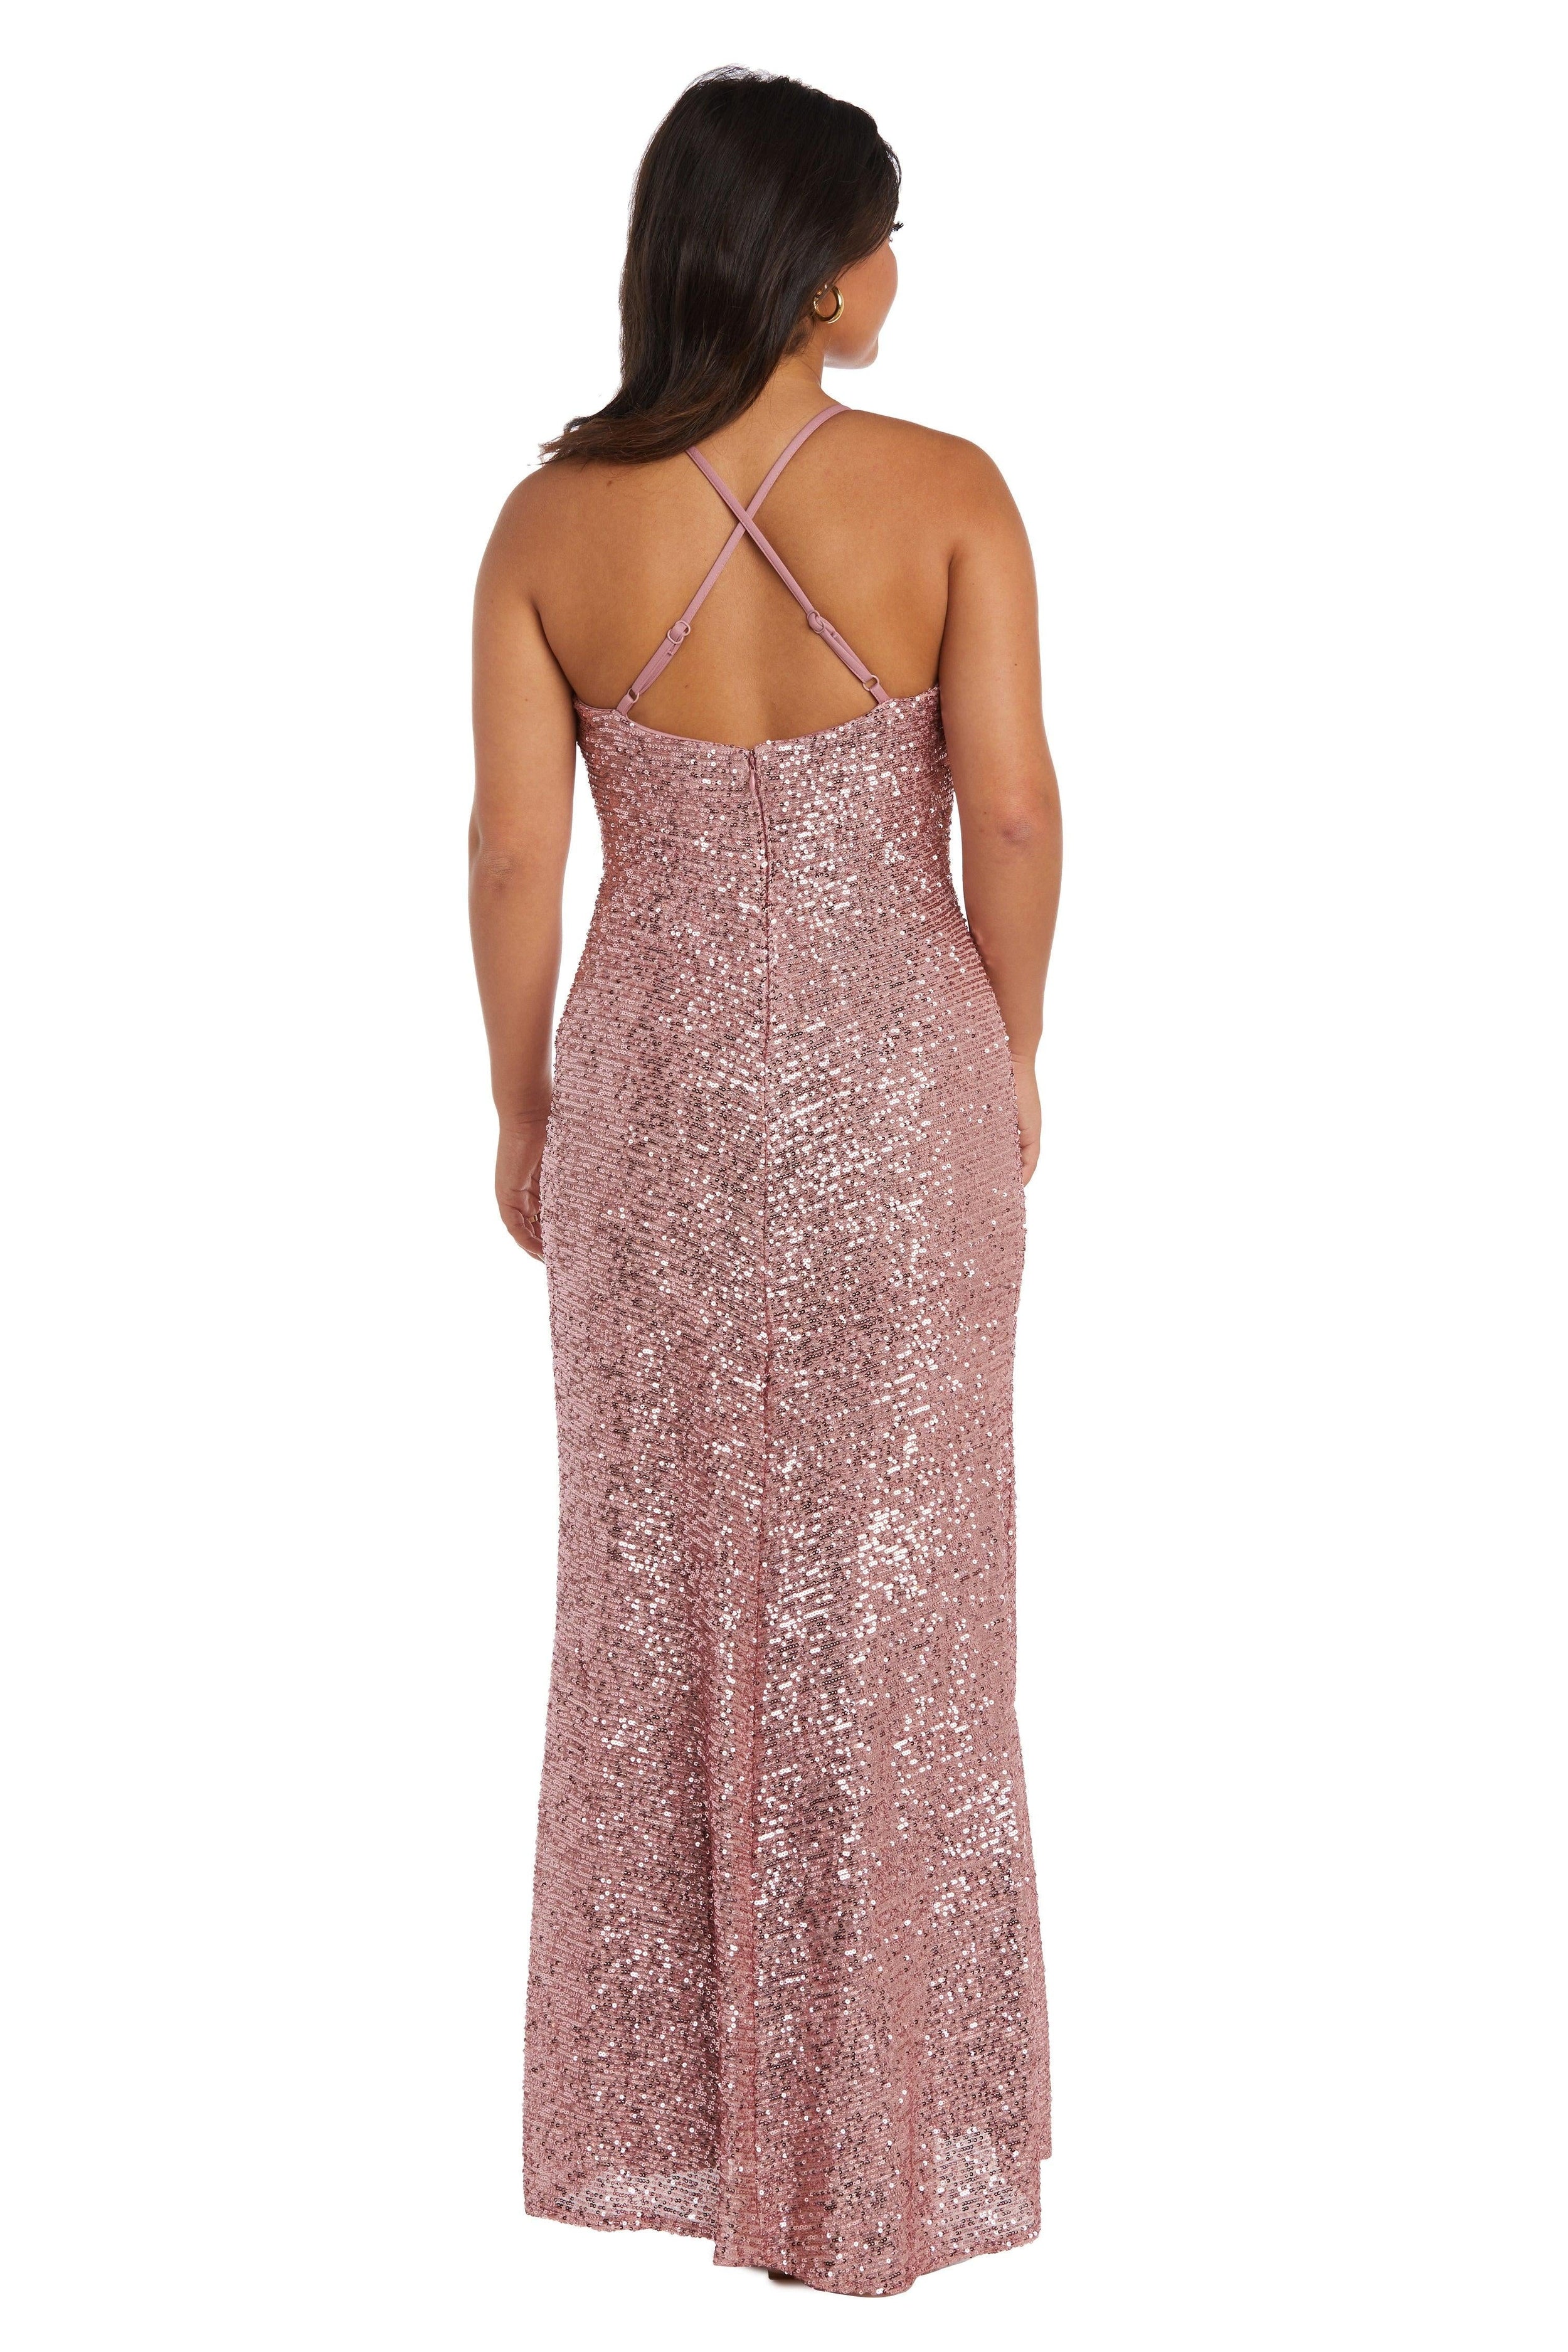 Nightway Long Formal Evening Dress 21936A - The Dress Outlet